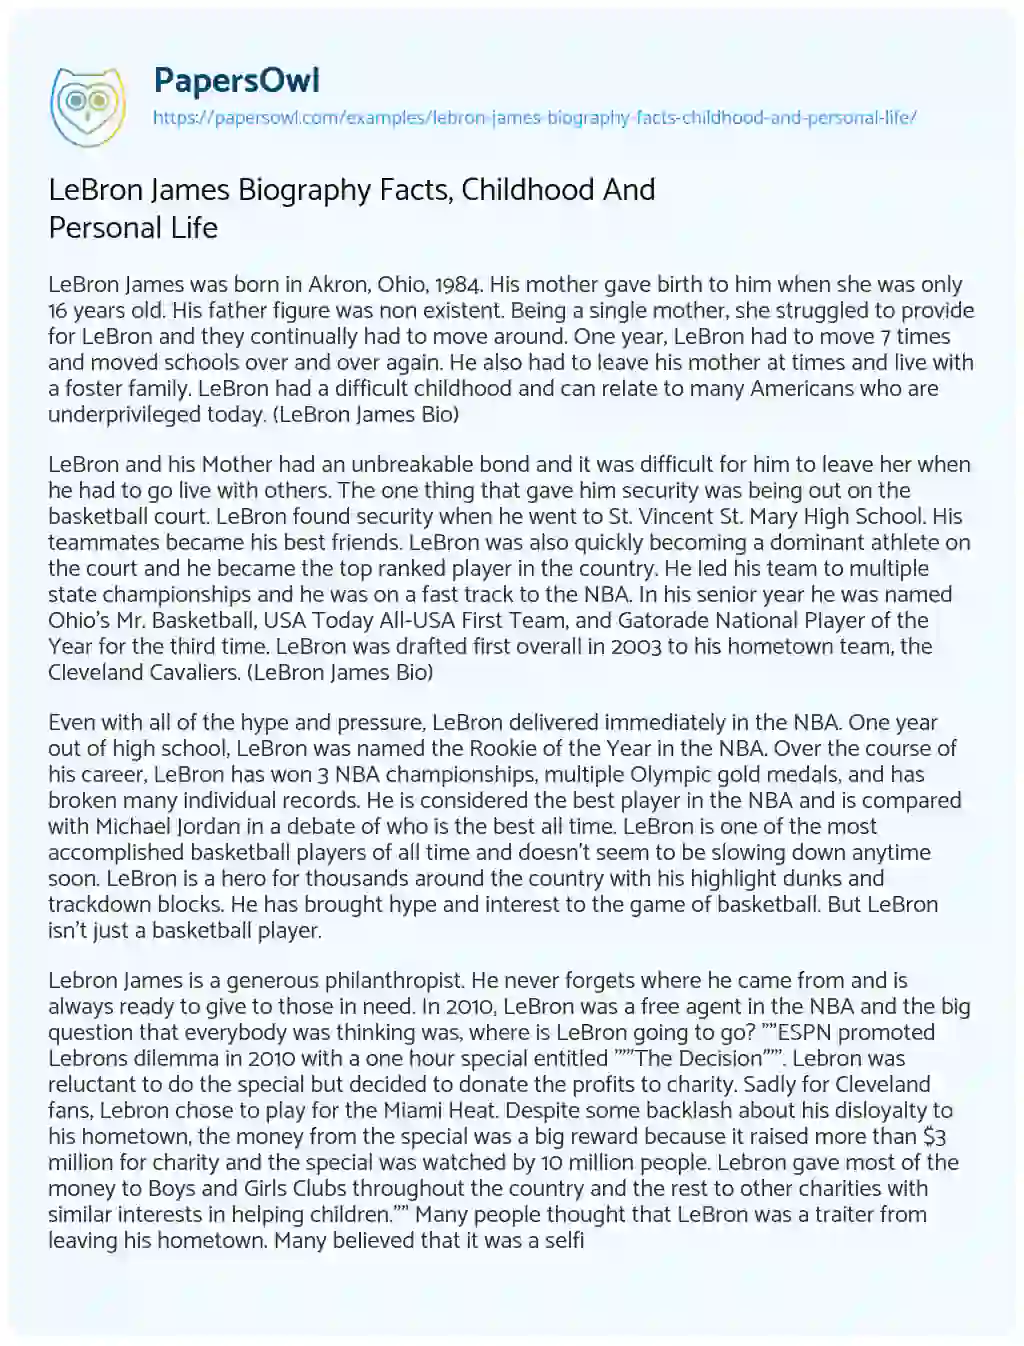 Essay on LeBron James Biography Facts, Childhood and Personal Life